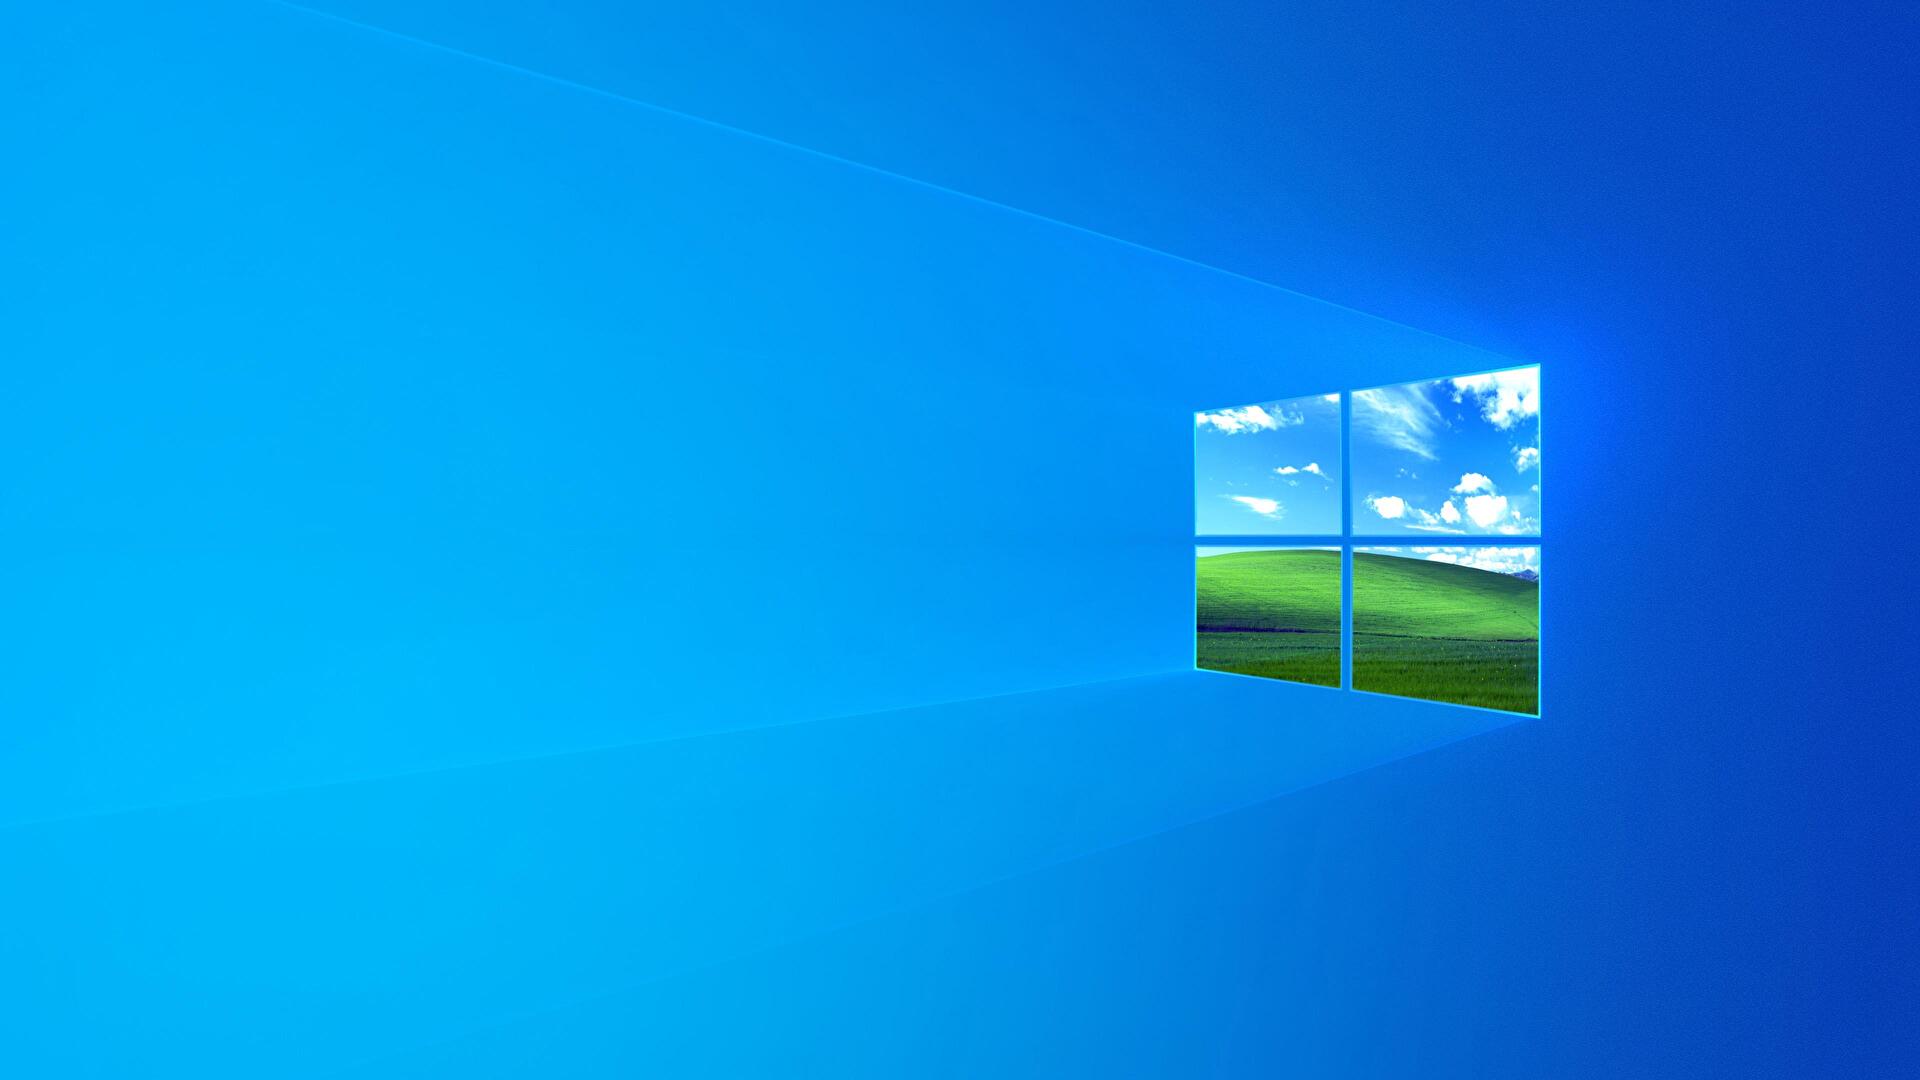 Windows 10 1903 Default Wallpaper With A Flavor Of 10 1903 Background